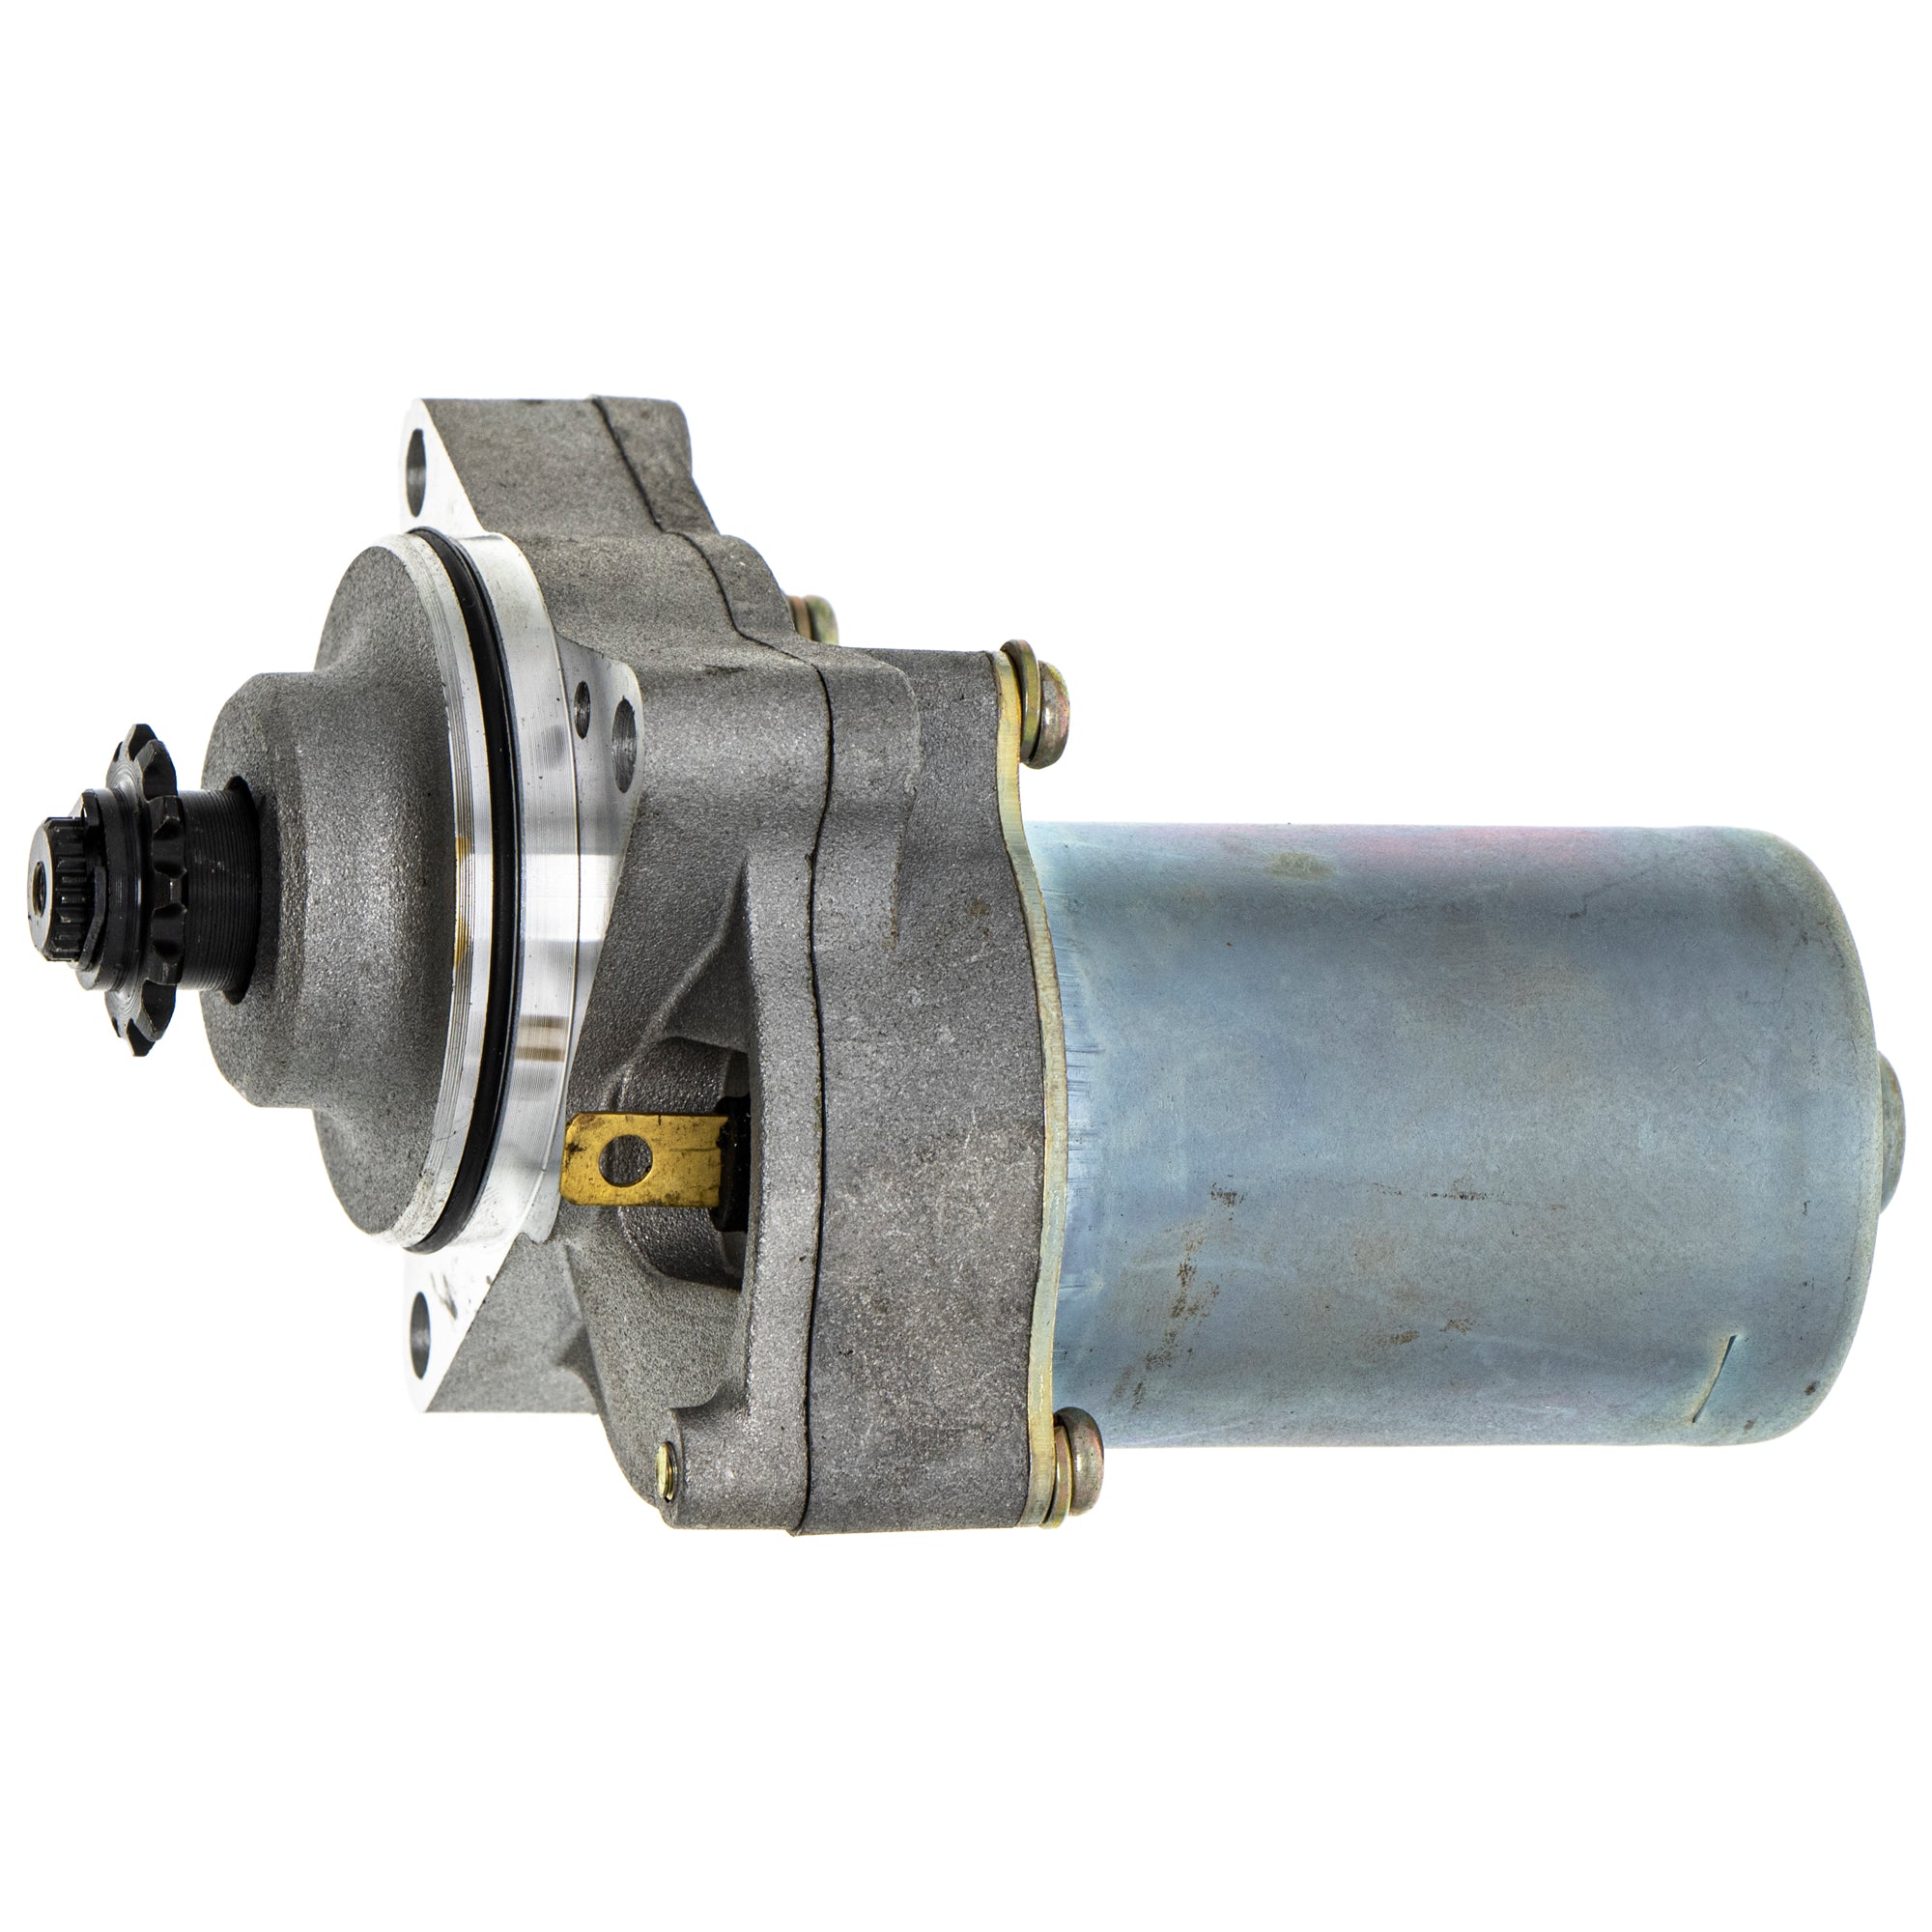 NICHE 519-CSM2359O Starter Motor Assembly for zOTHER TRX90X Sportrax